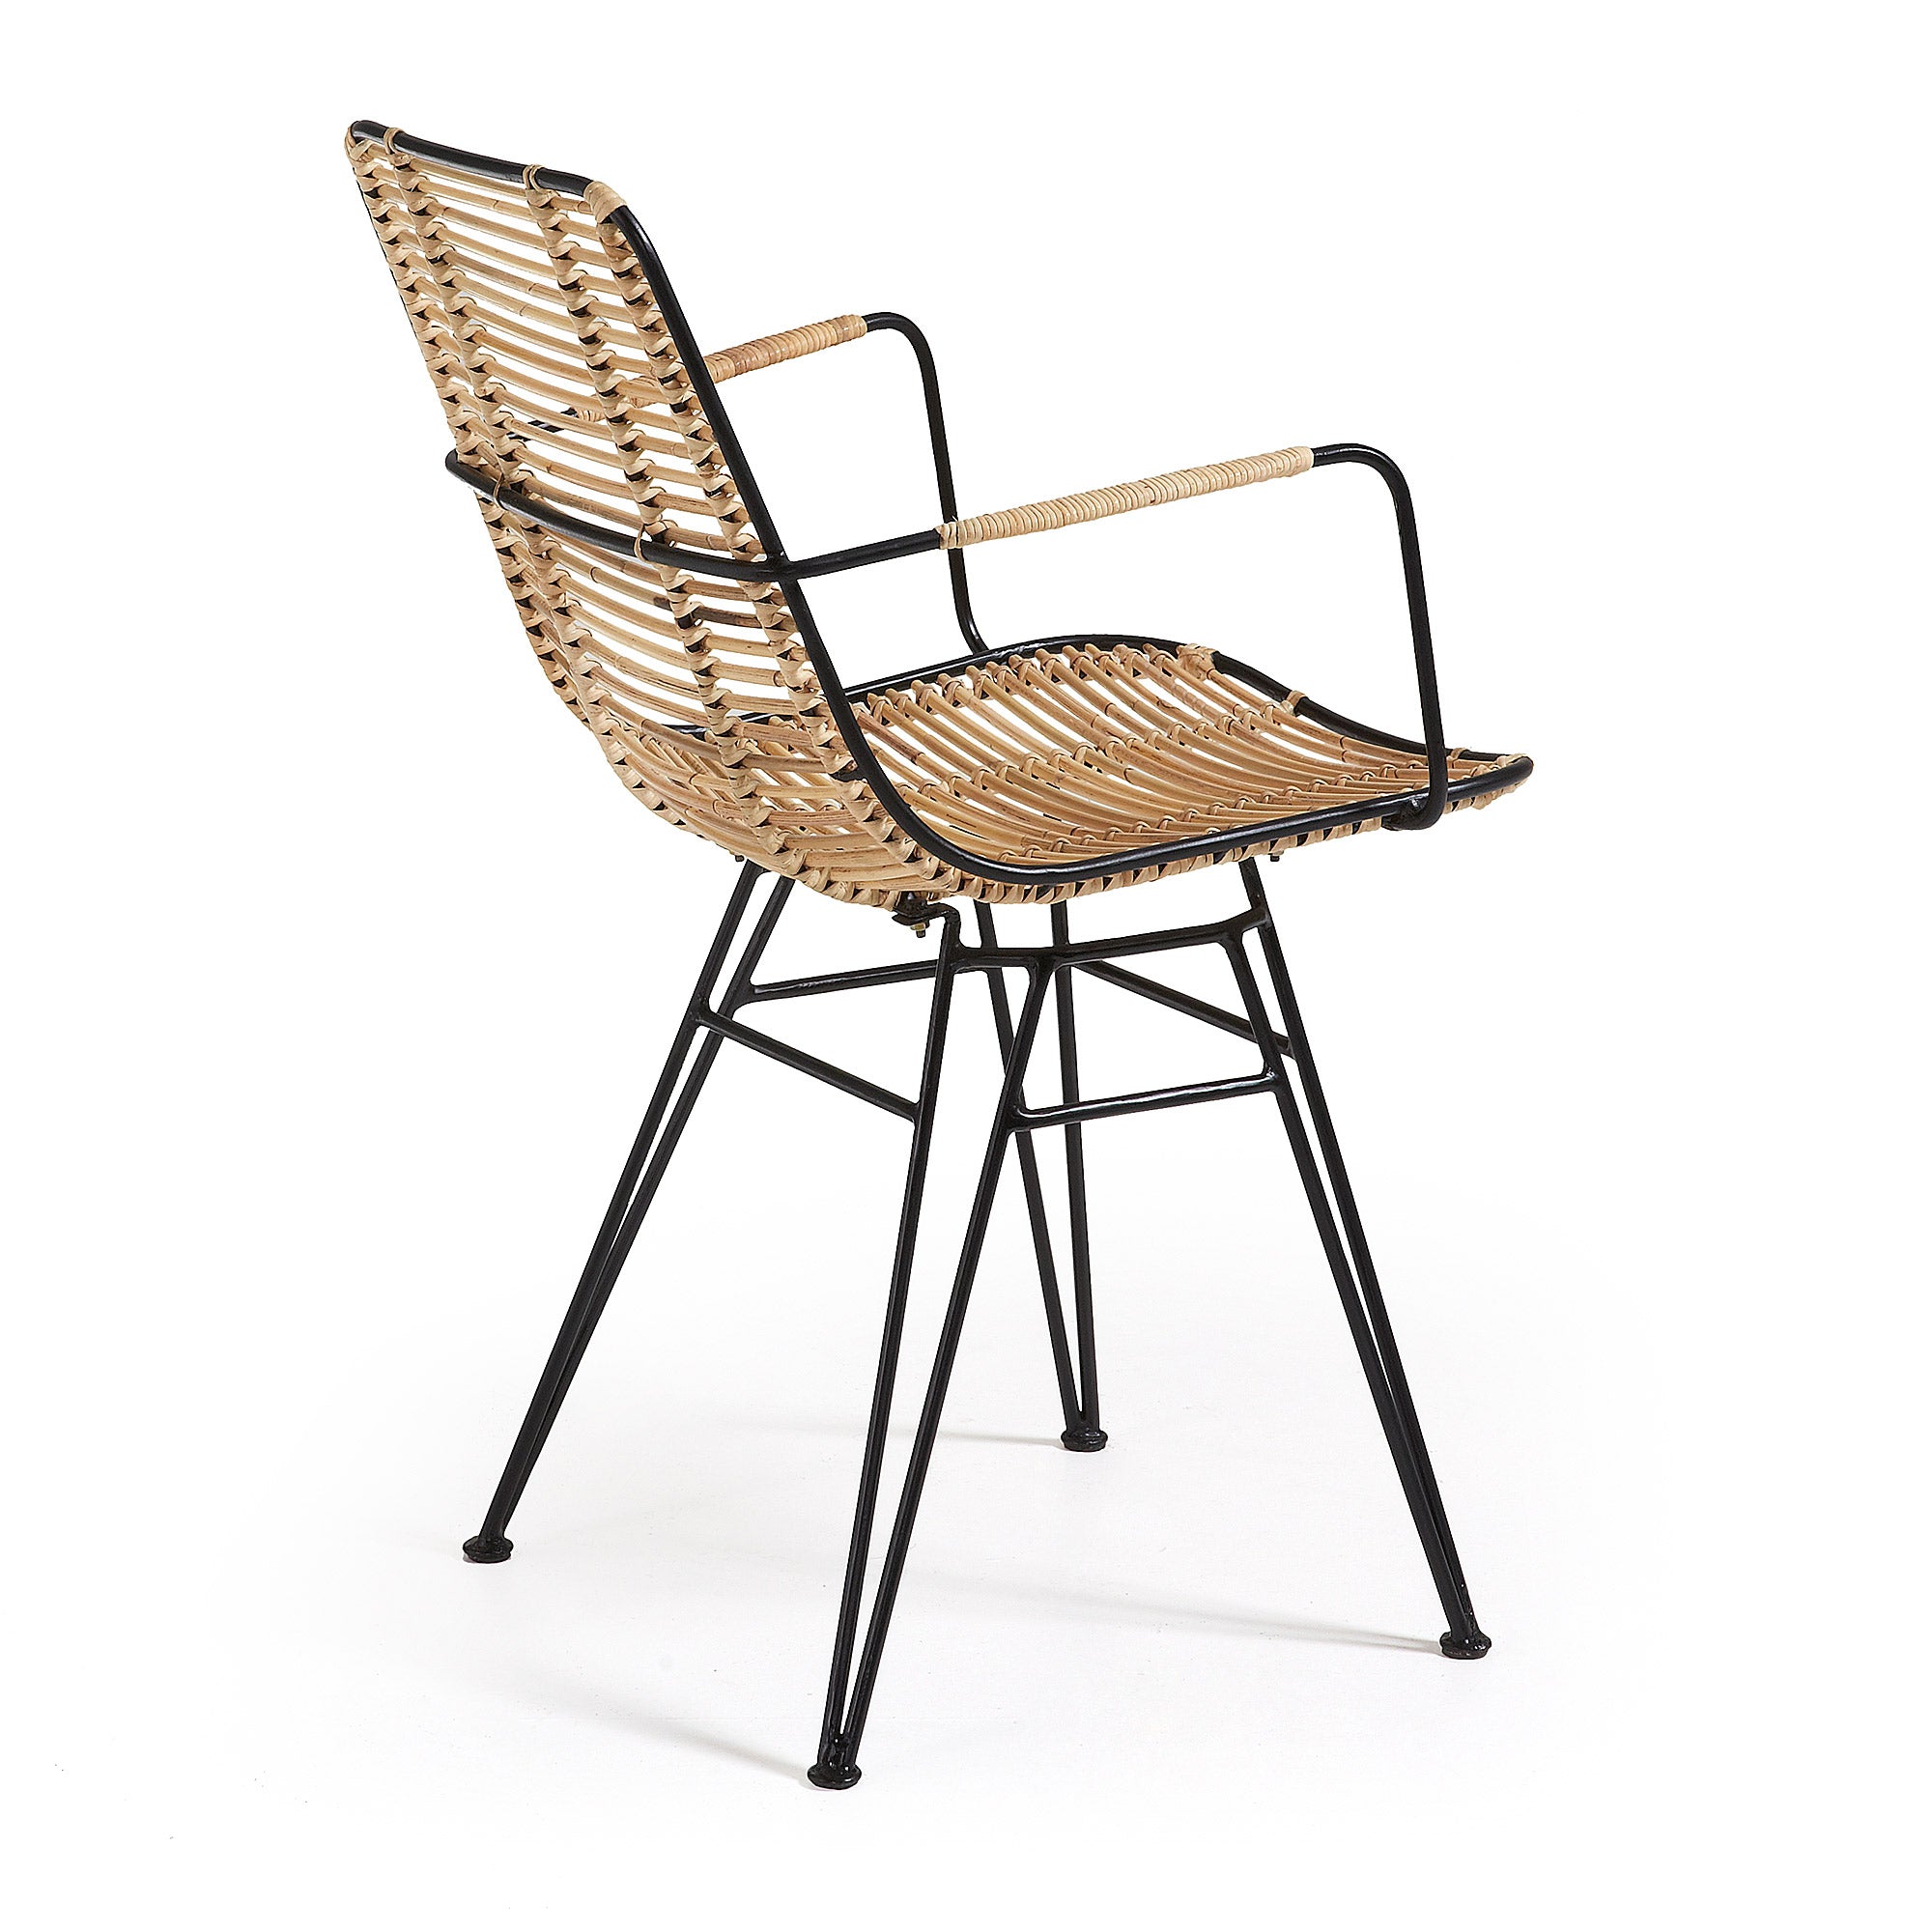 Tishana rattan and black steel chair with armrests